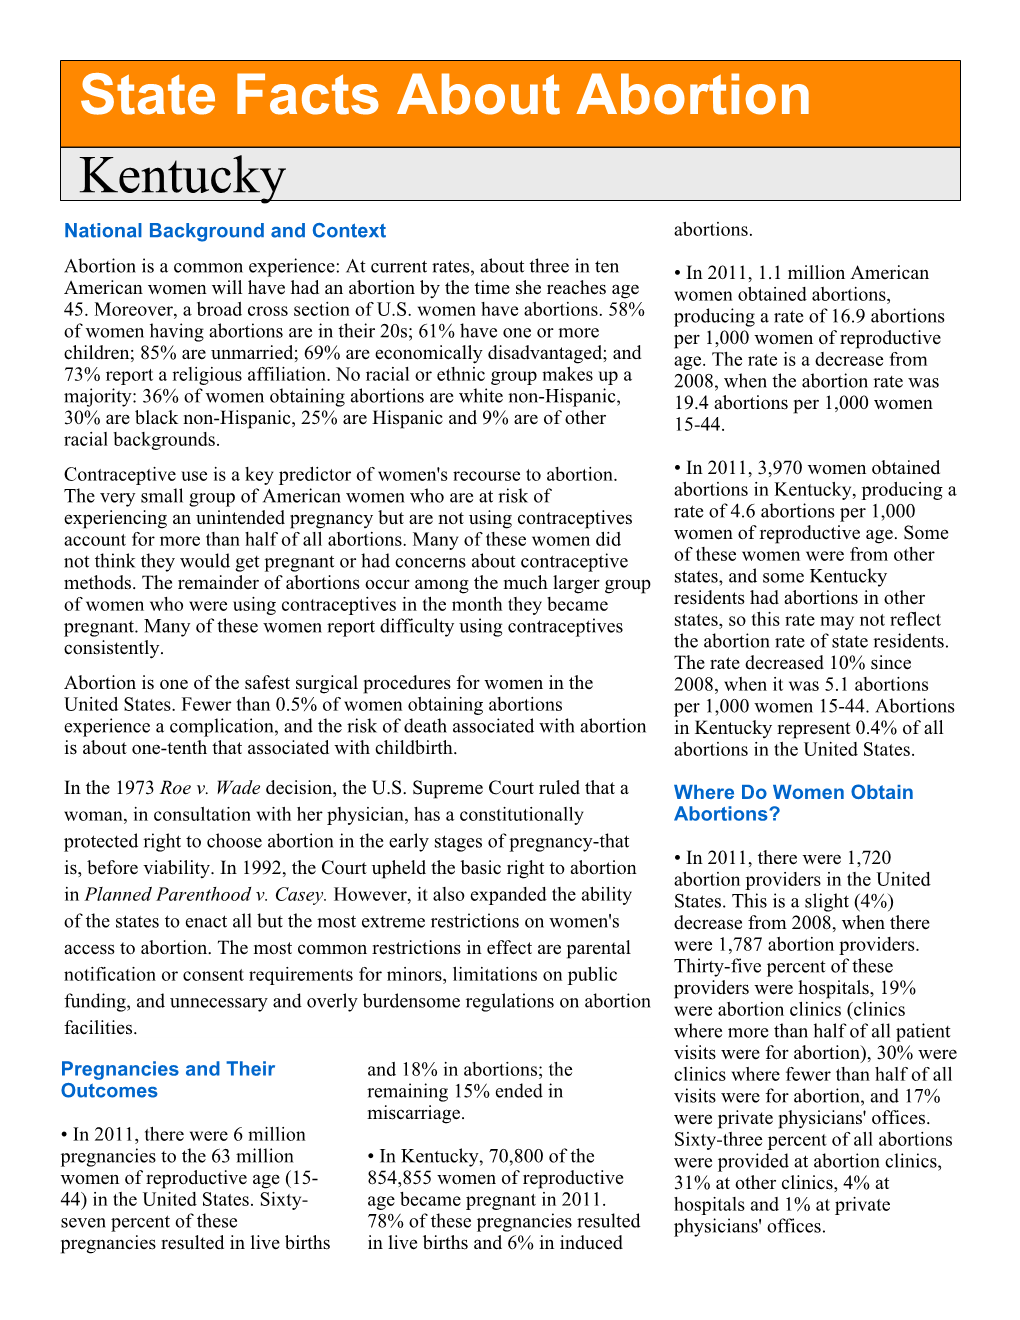 State Facts About Abortion Kentucky National Background and Context Abortions